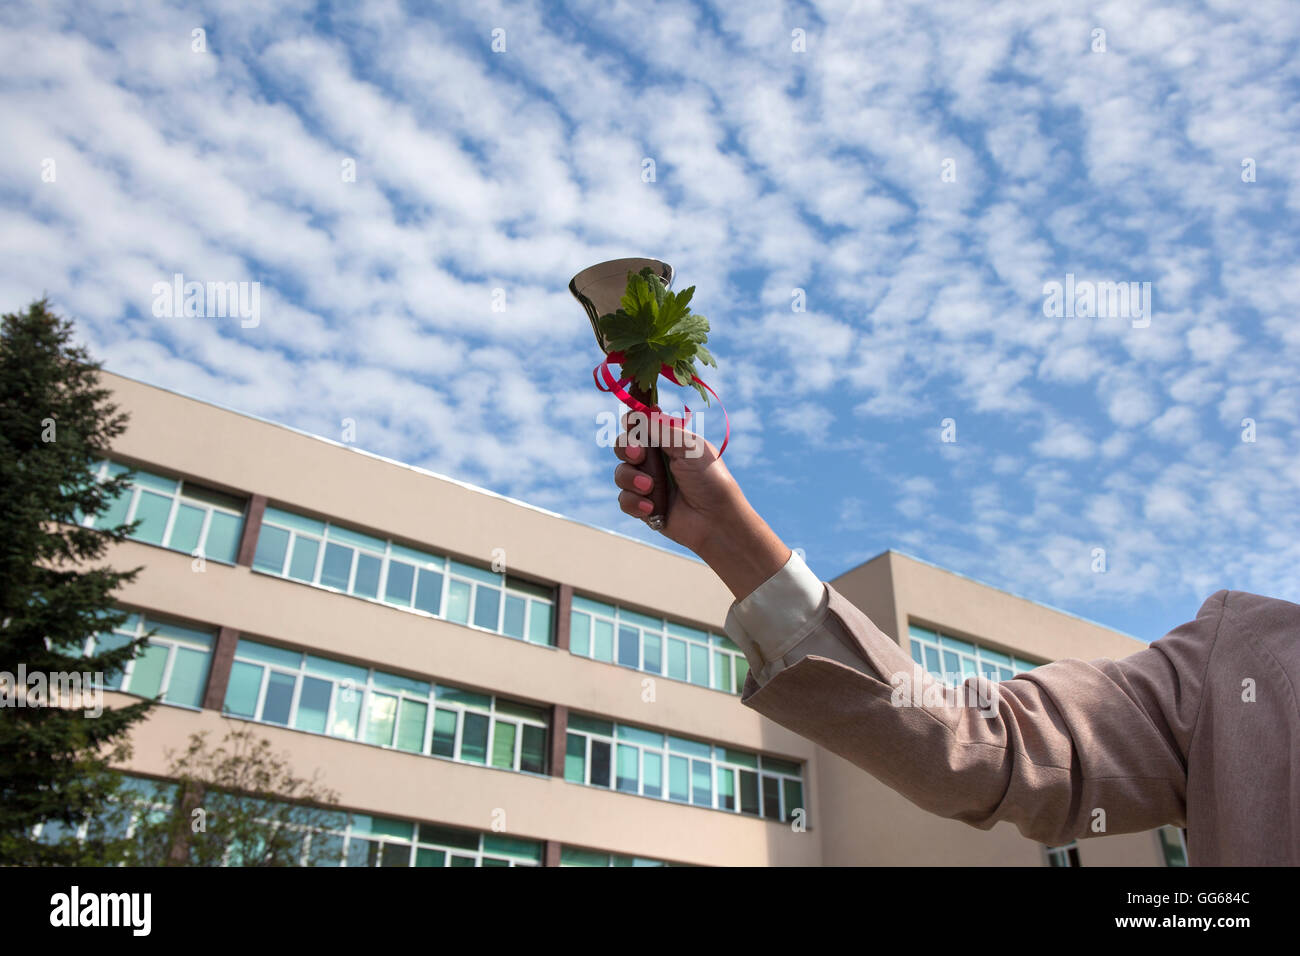 School bell ringing in hand of a woman for the back to school day. Stock Photo